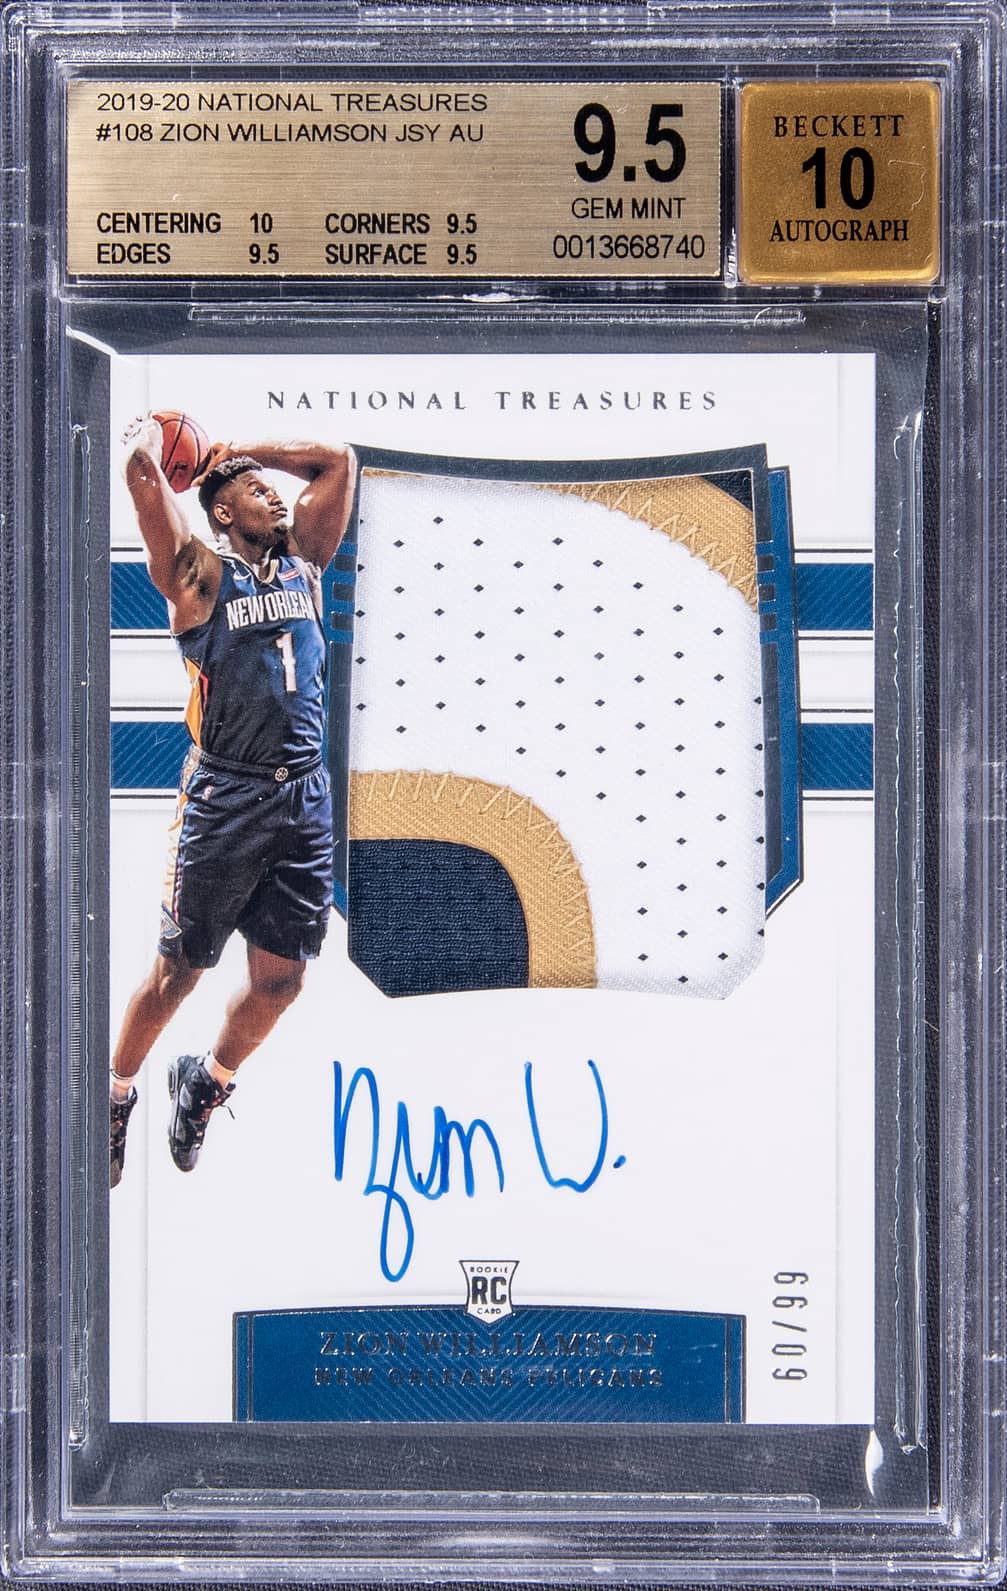 The Most Expensive Zion Williamson Basketball Card Ever Sold